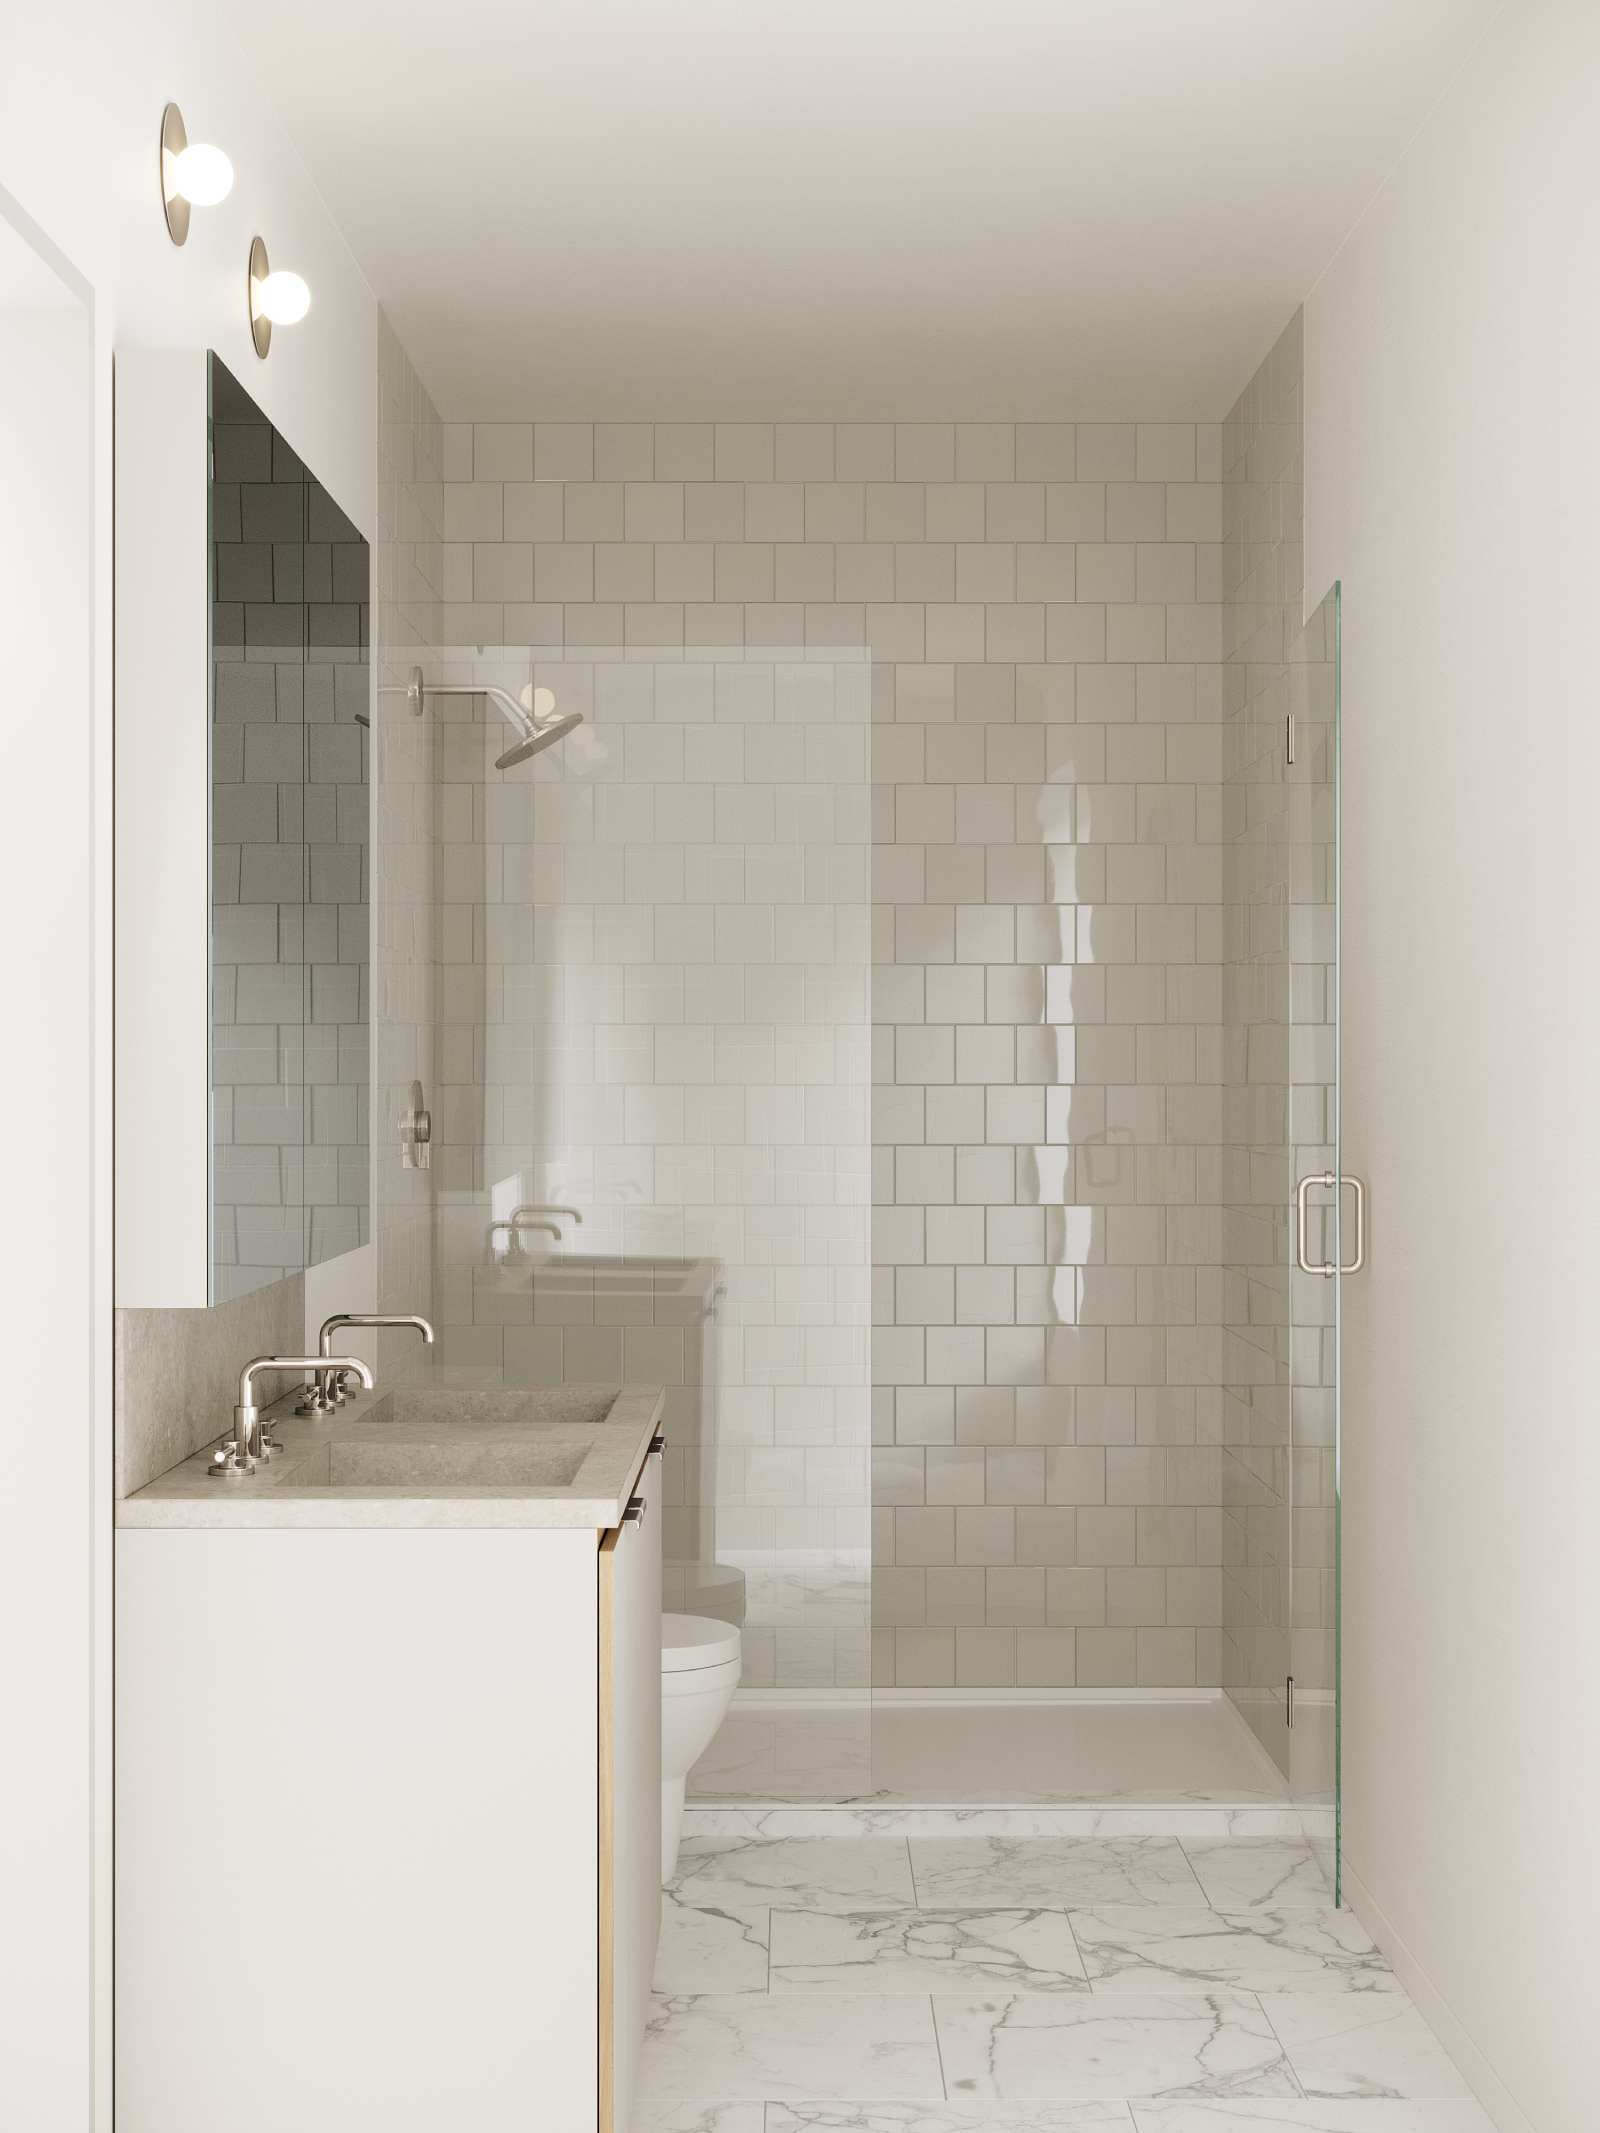 A 3D rendering of the main bathroom at Kelly Condos, a custom residential property designed by Farmer Payne Architects.